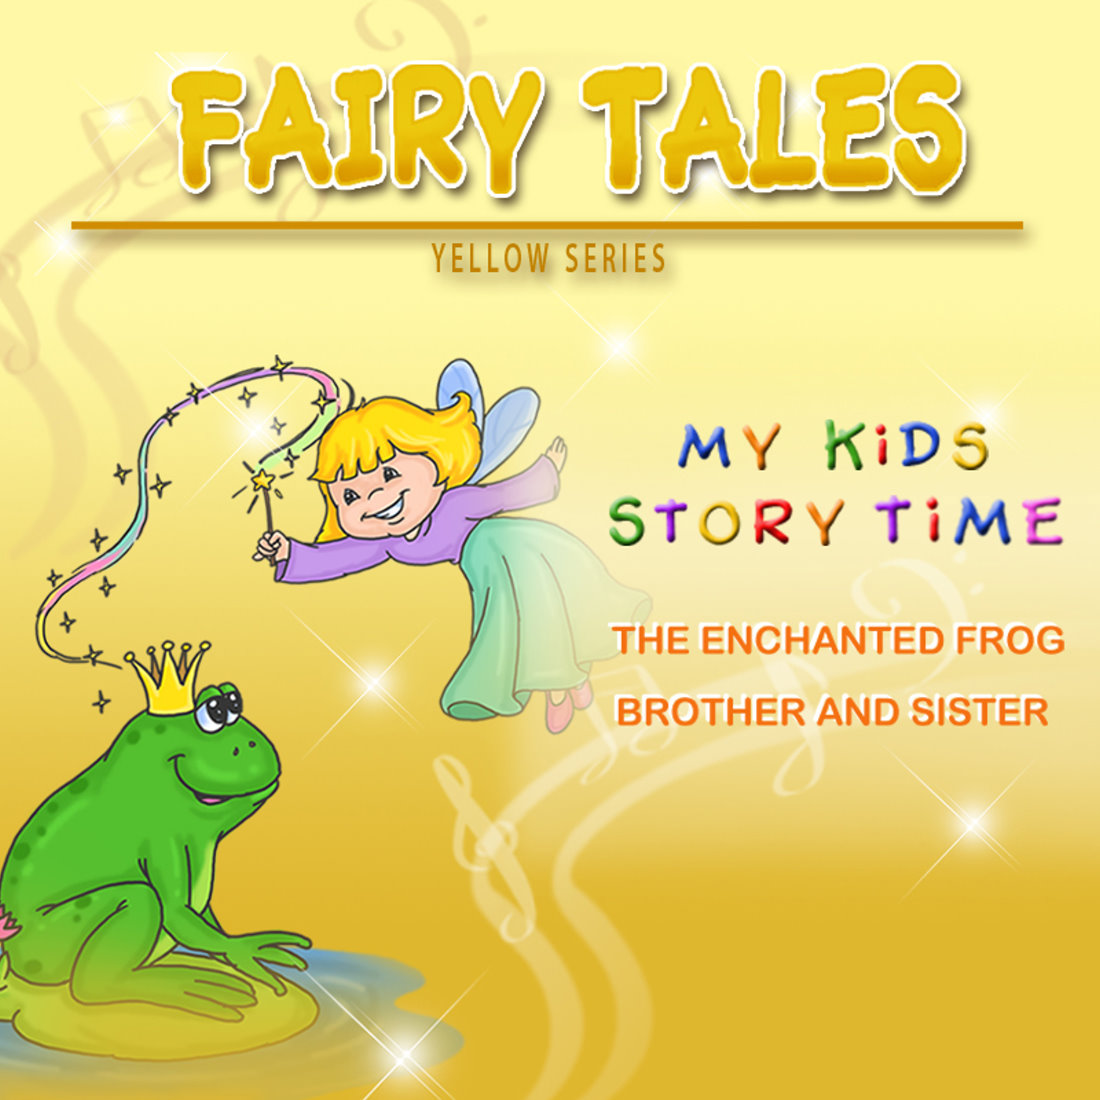 Yellow Tale. Fairy Tale Song for Kids. Clever Yellow Tale. Tale songs